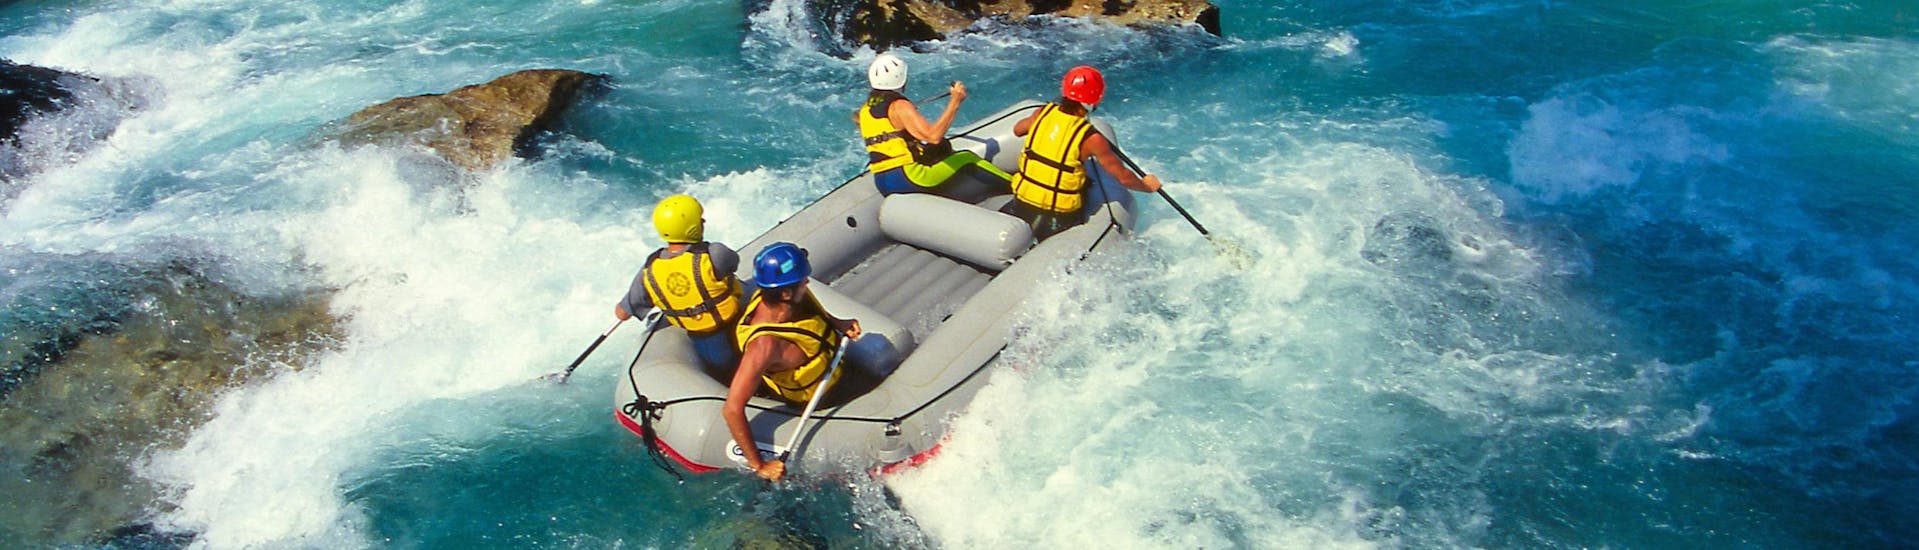 A group of friends having fun on a white water rafting tour in the rafting hotspot of Erpfendorf.